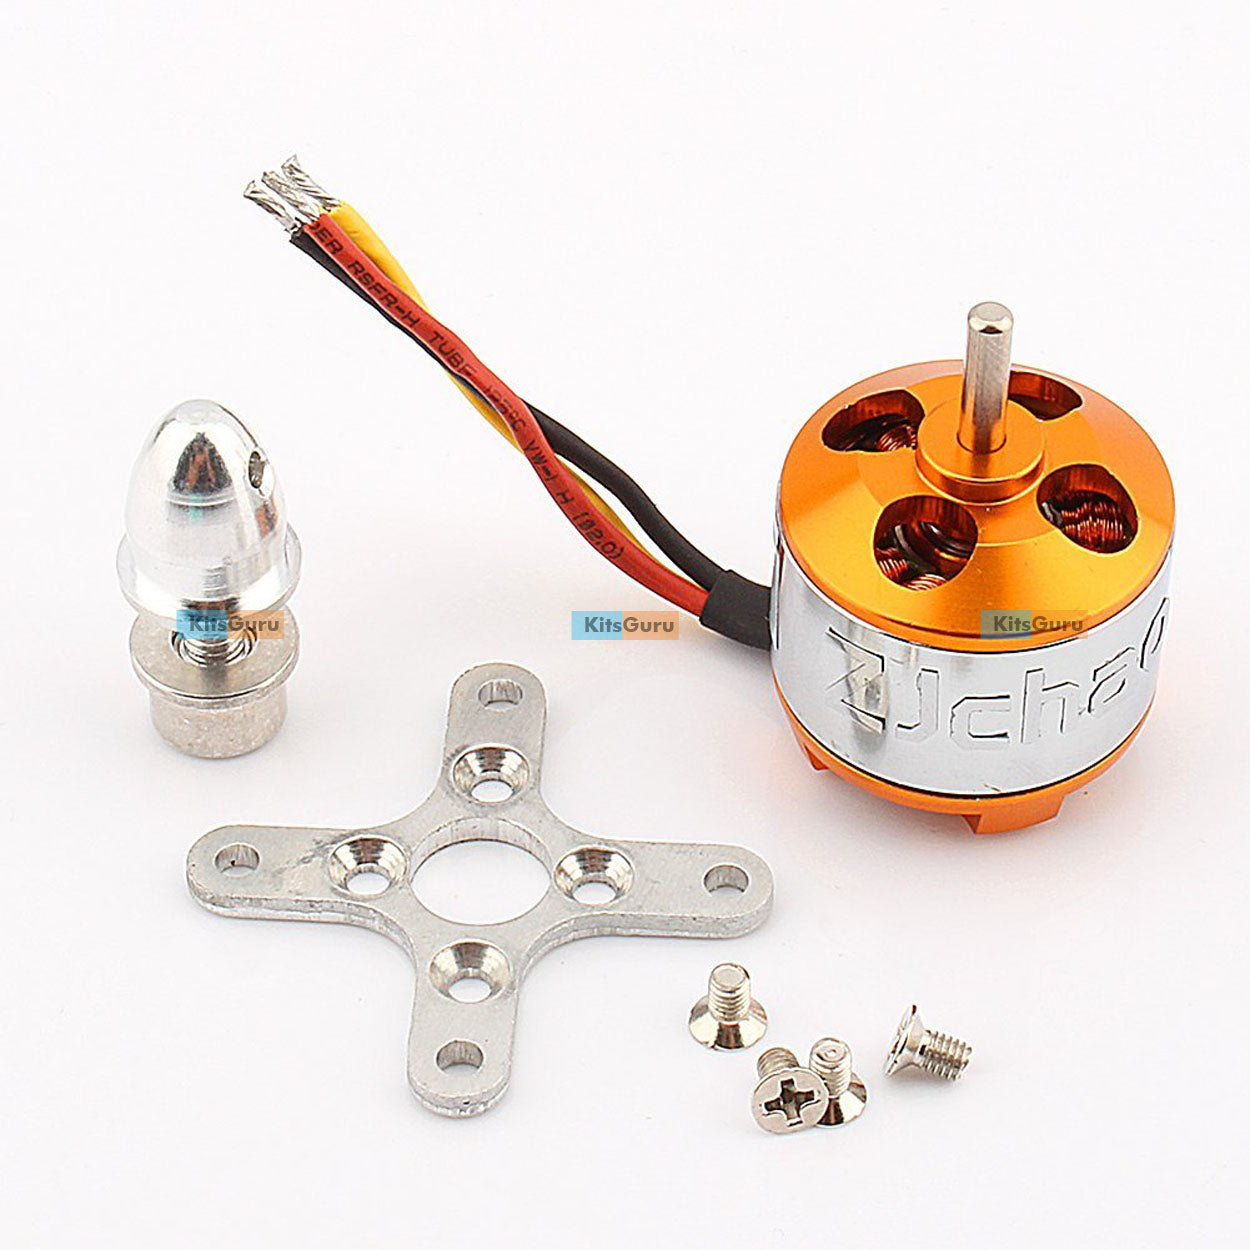 XXD A2212 KV1400 Brushless Motor H364 For RC Airplane Quadcopter